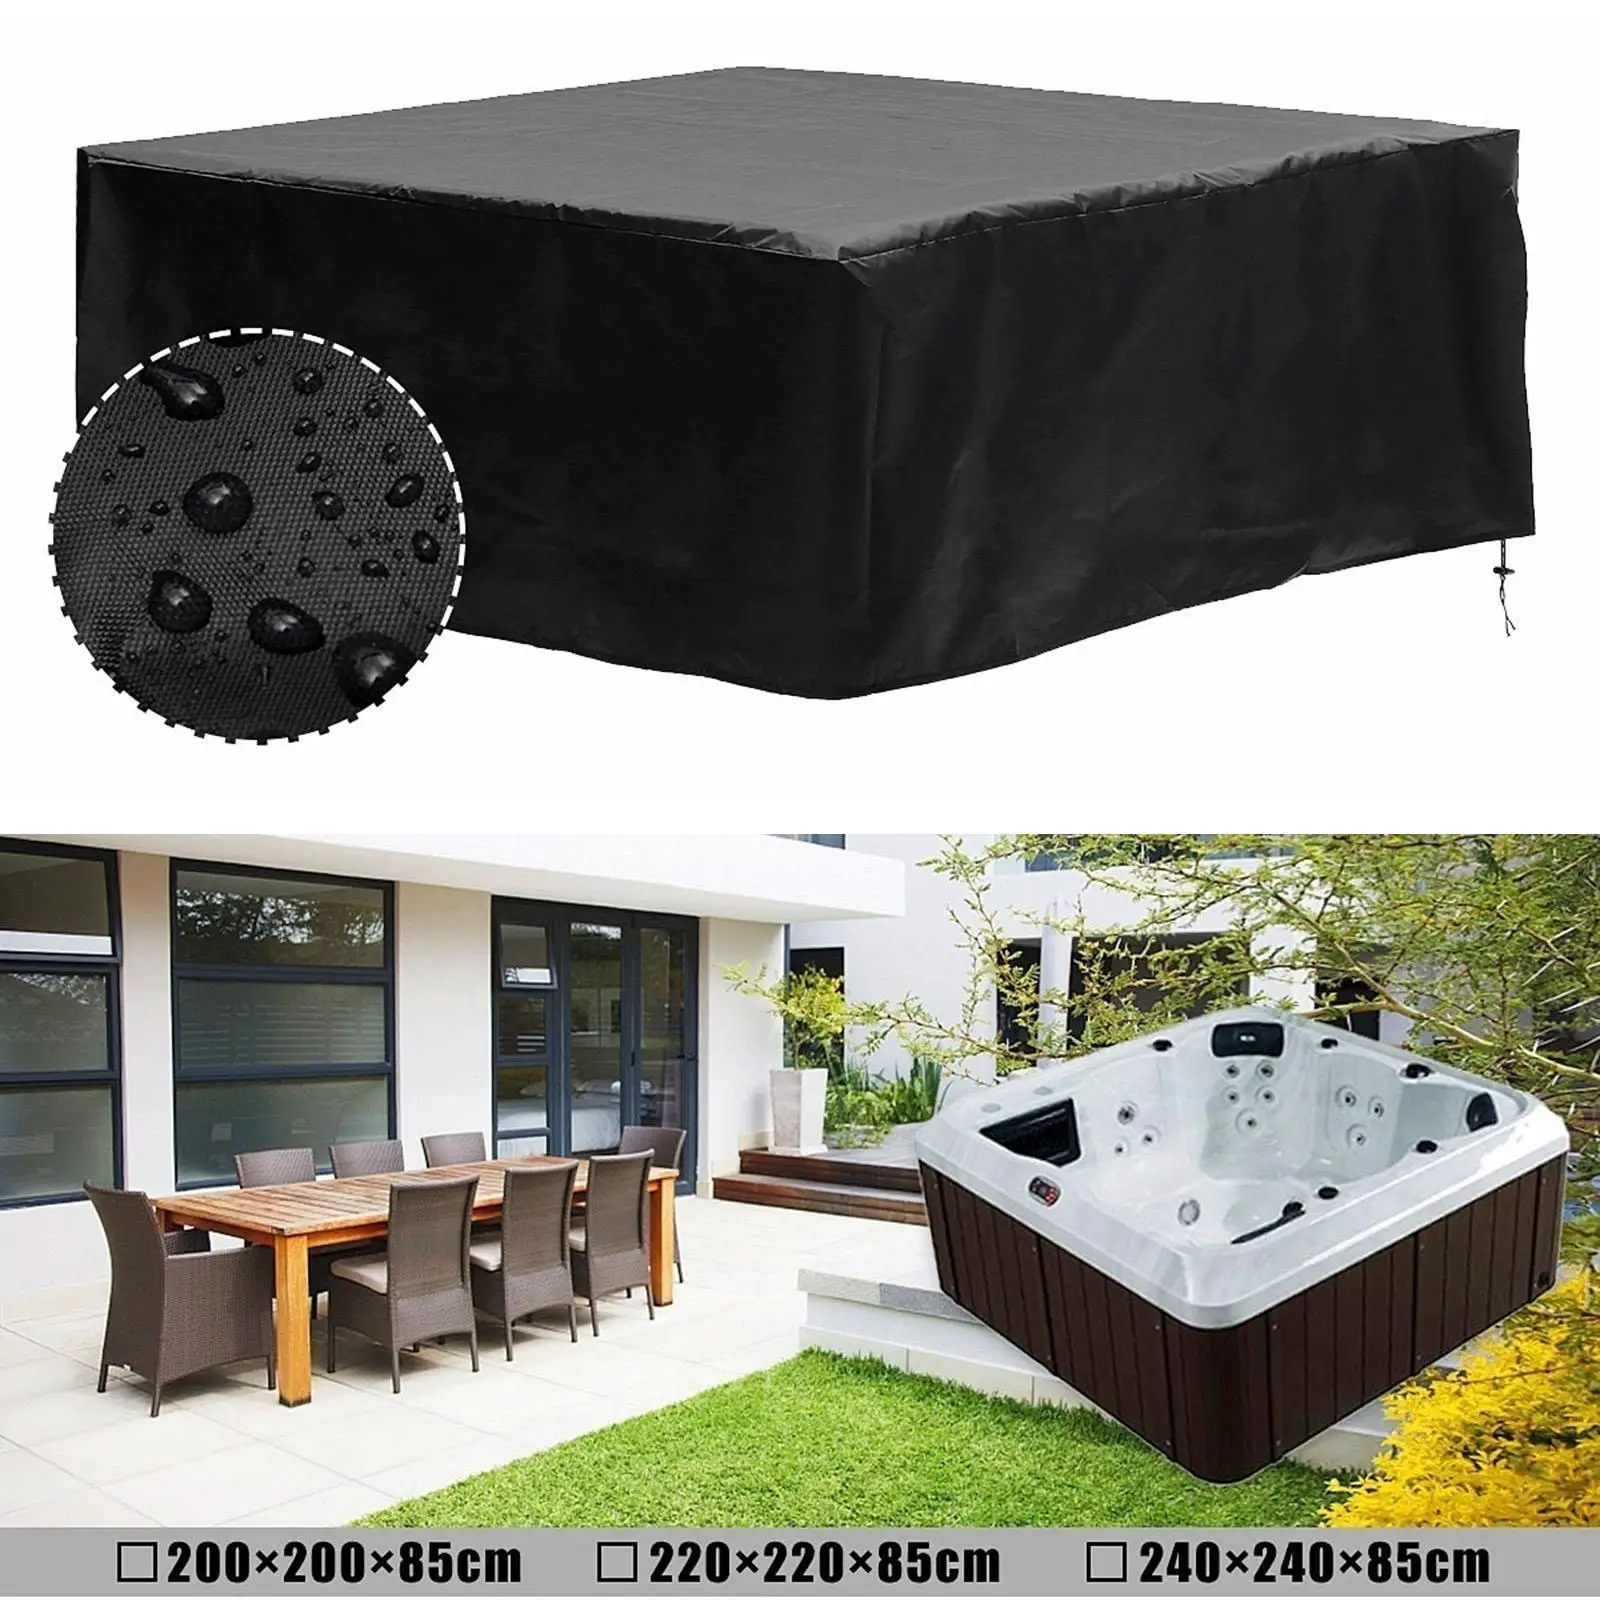 Hot Tub Cover  Protective Cover Windproof Guard Bathtub for 